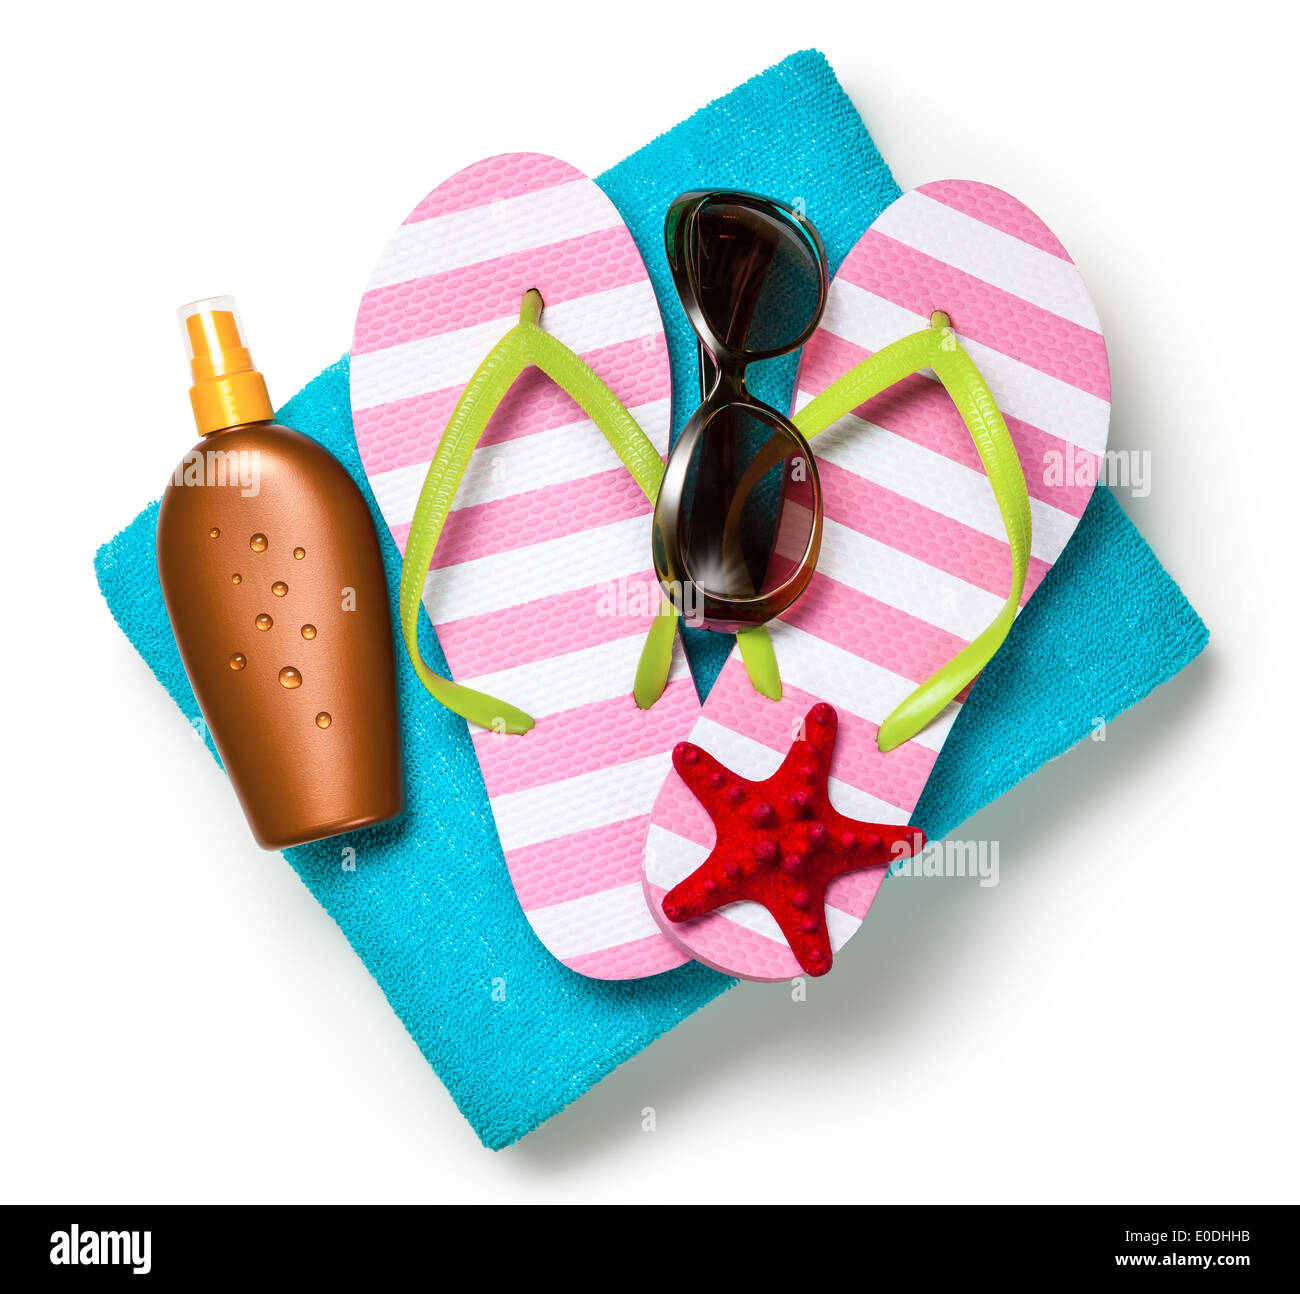 Beach accessories. Flip-flops, towel, sun tan lotion and sunglasses on white background. Top view Stock Photo